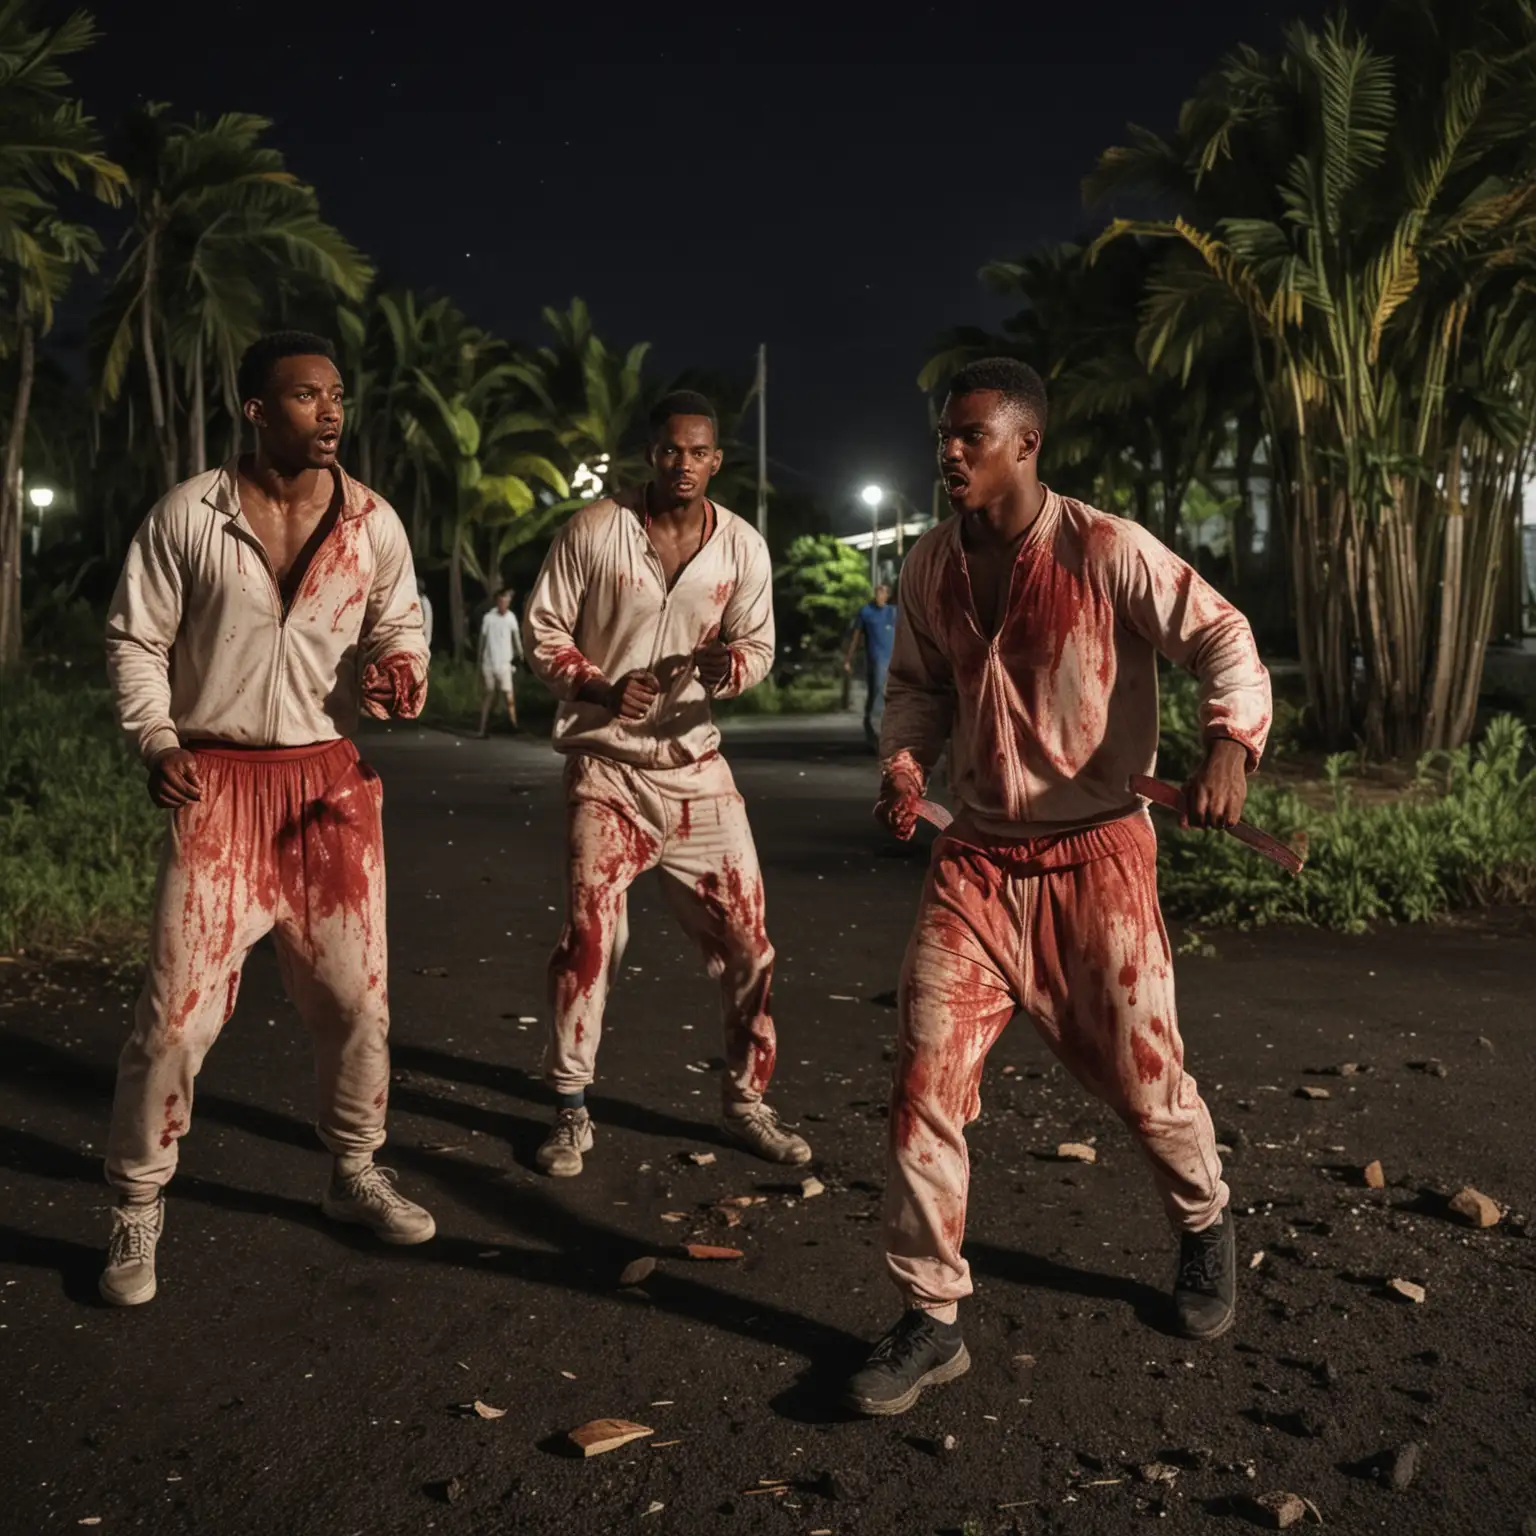 Oceanian Men in Tracksuits Chasing on Tarred Ground in Runion Island Night